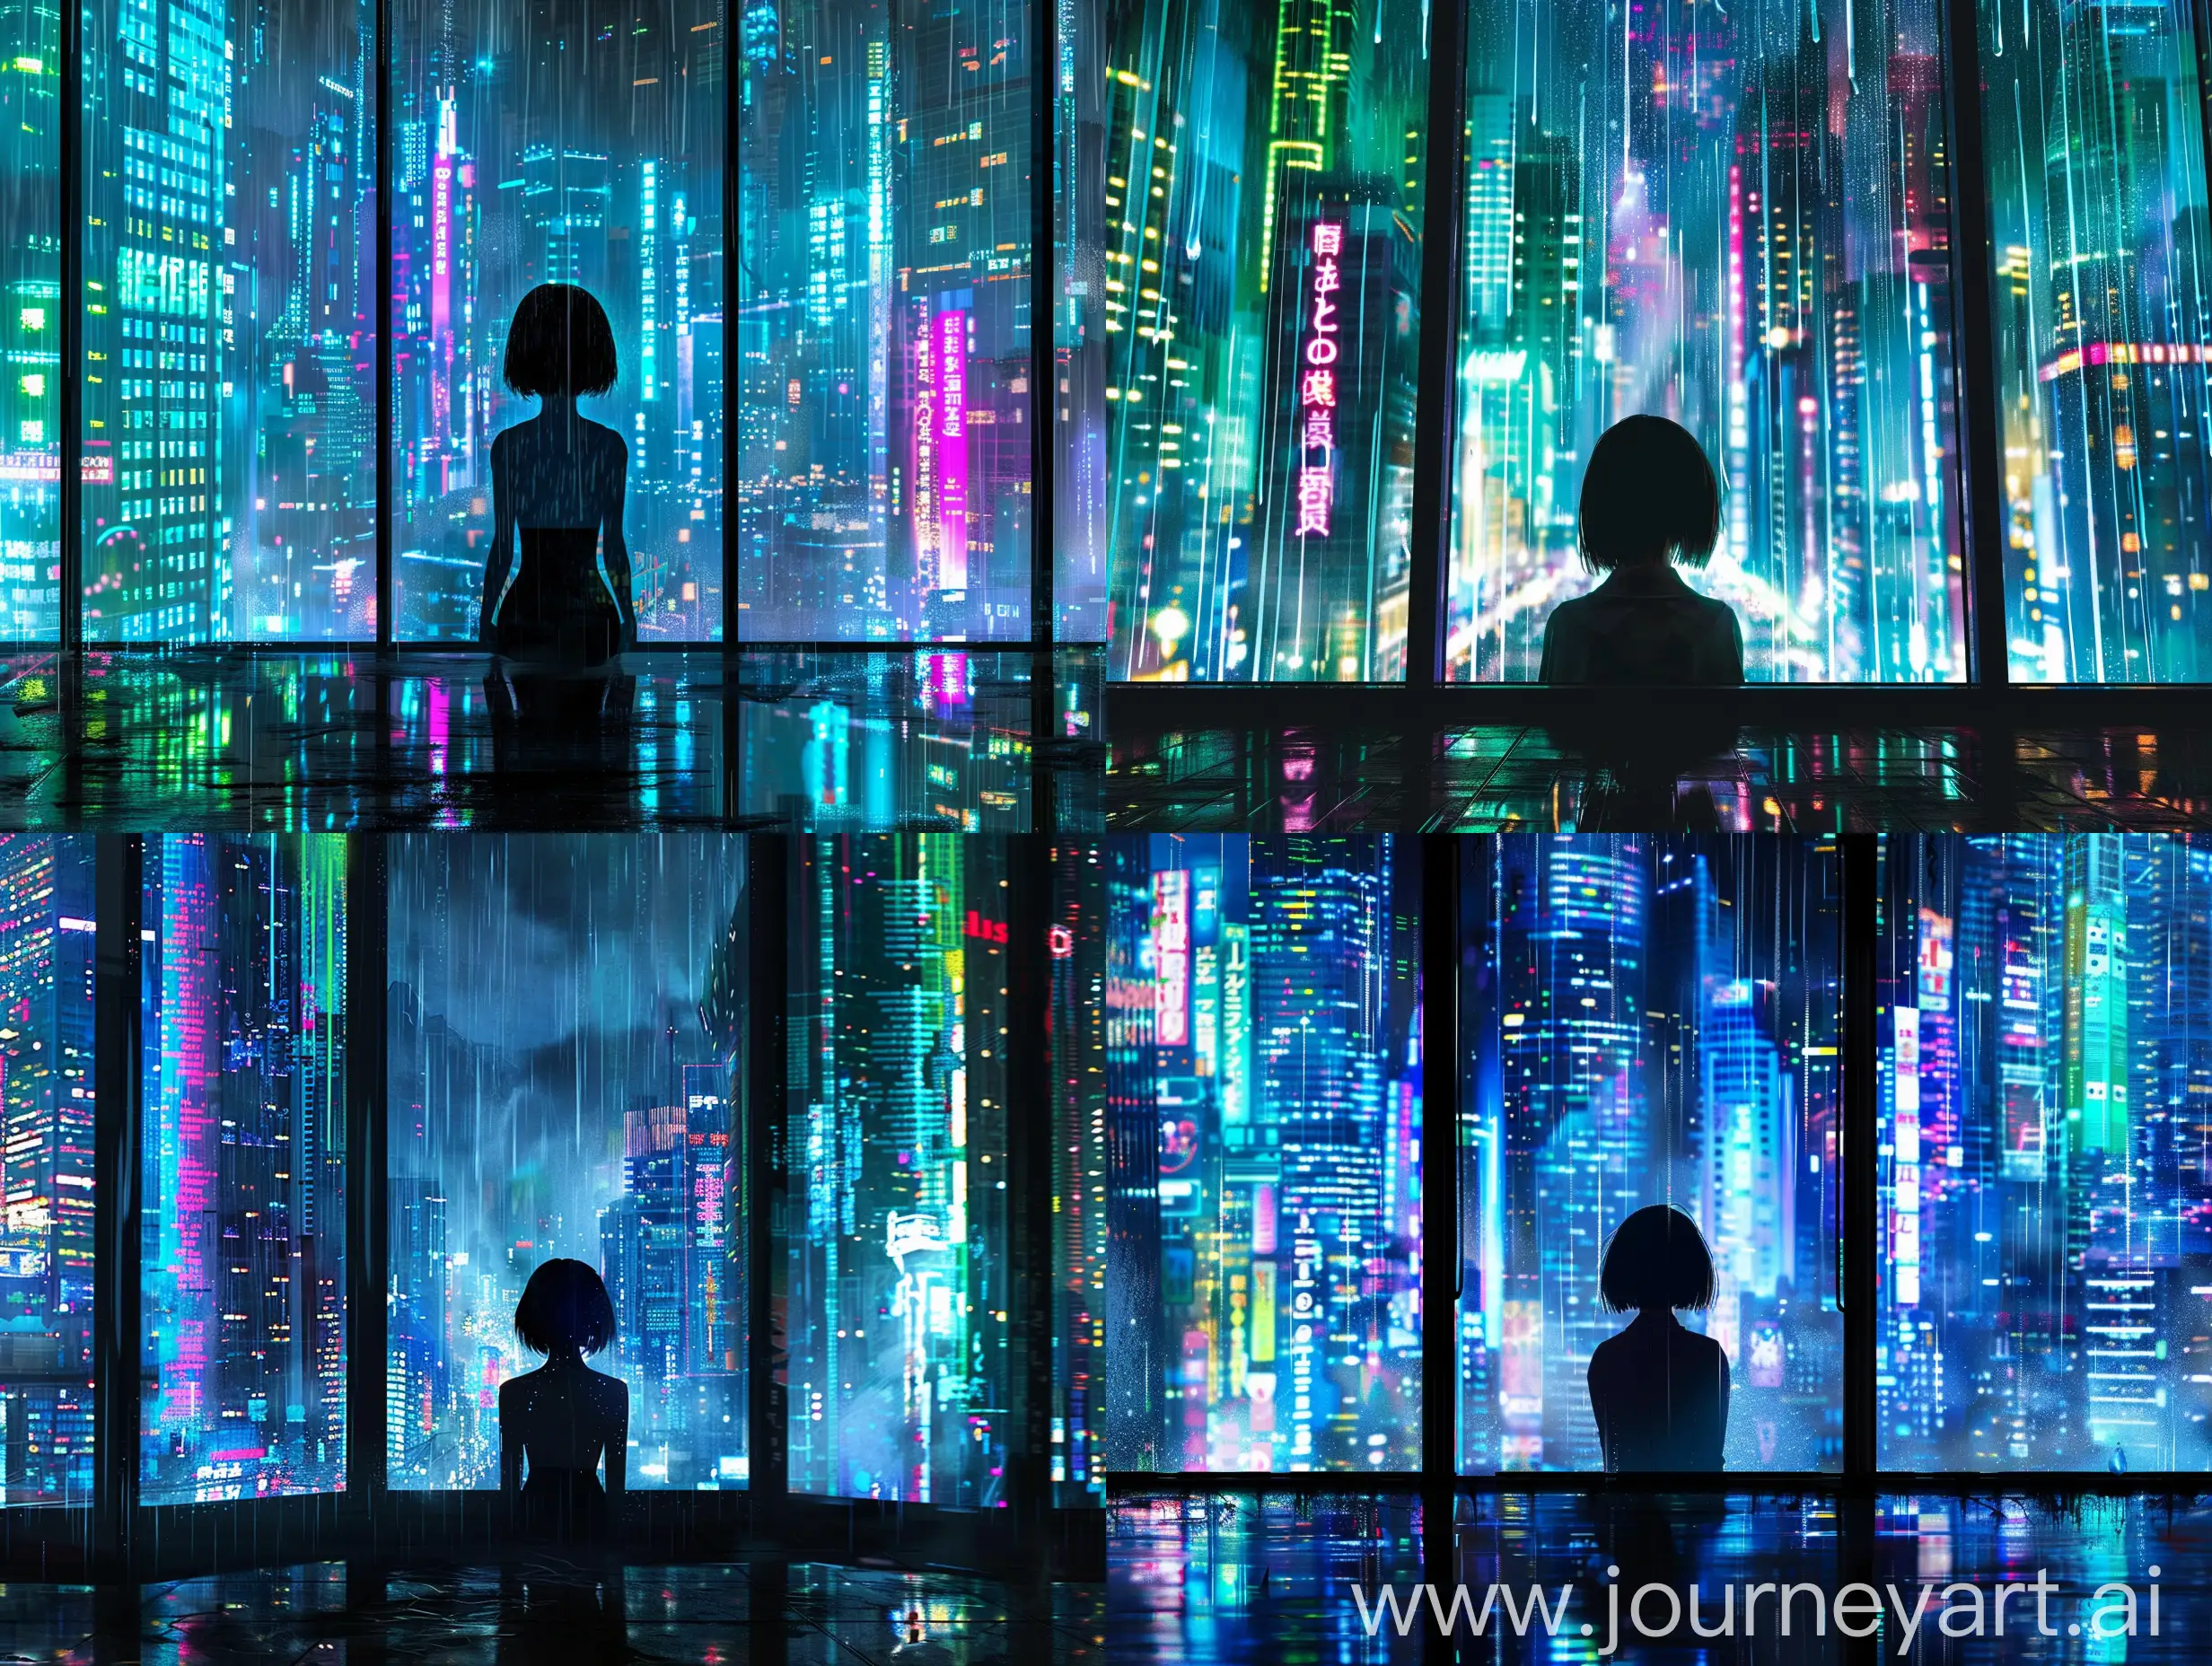 Visualize a cyberpunk-themed image that features a single, central figure of a woman with a bob haircut silhouetted against a neon-drenched futuristic cityscape viewed through a rain-soaked window at night. The neon lights from towering skyscrapers should cast a vibrant array of blues, greens, and pinks, reflecting off the wet surfaces and the window's glass, which is segmented by the dark, vertical lines of the window's frame, giving the illusion of a triptych. The scene should embody the high-tech, low-life philosophy of cyberpunk, with visible elements of advanced technology and urban decay. The rain adds to the atmosphere, with droplets streaking down the window, and the city's reflection should shimmer on the wet floor of the room from which the woman gazes out.